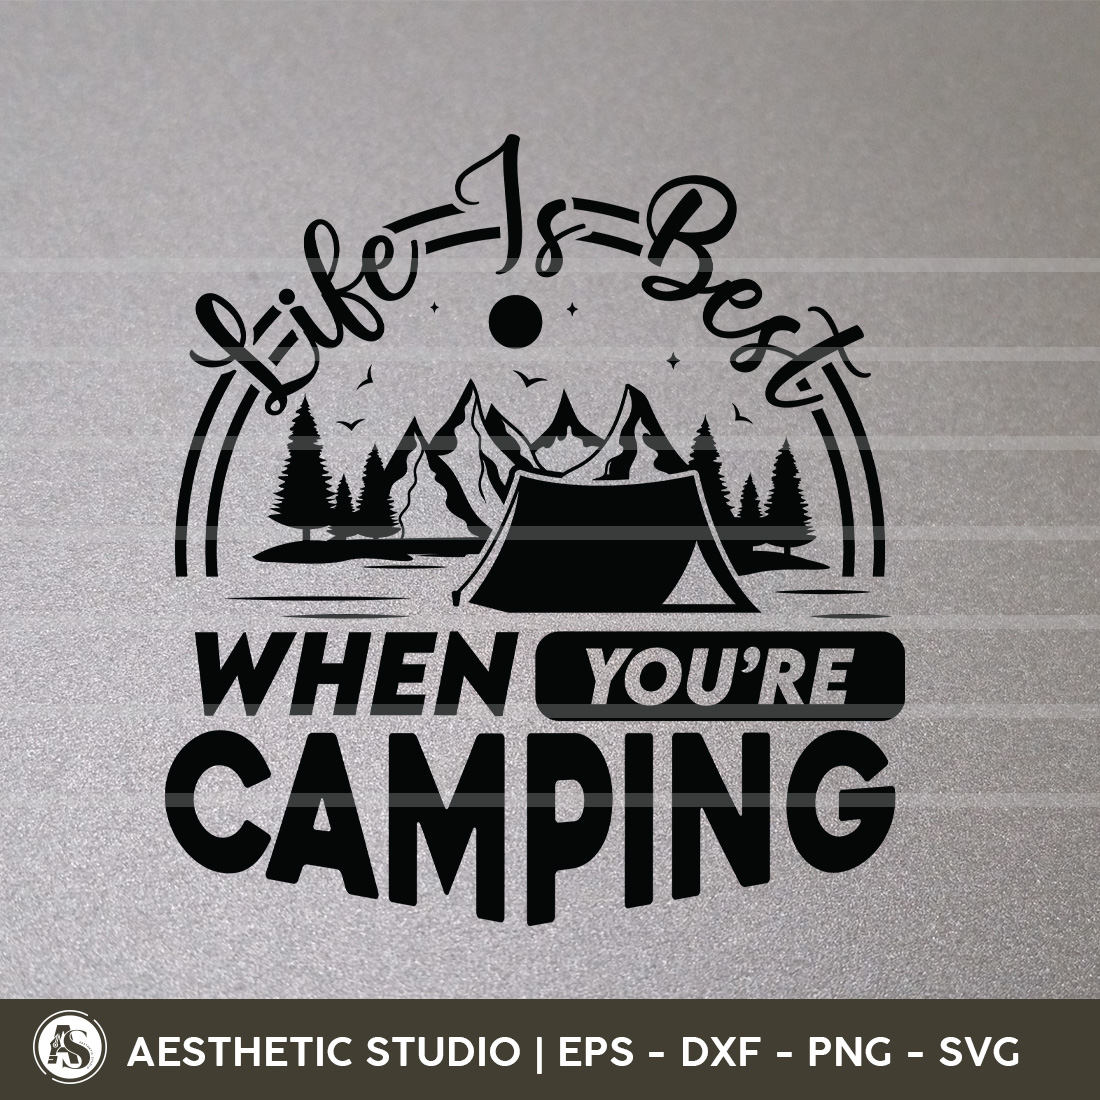 Life Is Best When You’re Camping, Camper, Adventure, Camp Life, Camping Svg, Typography, Camping Quotes, Camping Cut File, Funny Camping, Camping T-shirt Design, SVG, EPS cover image.